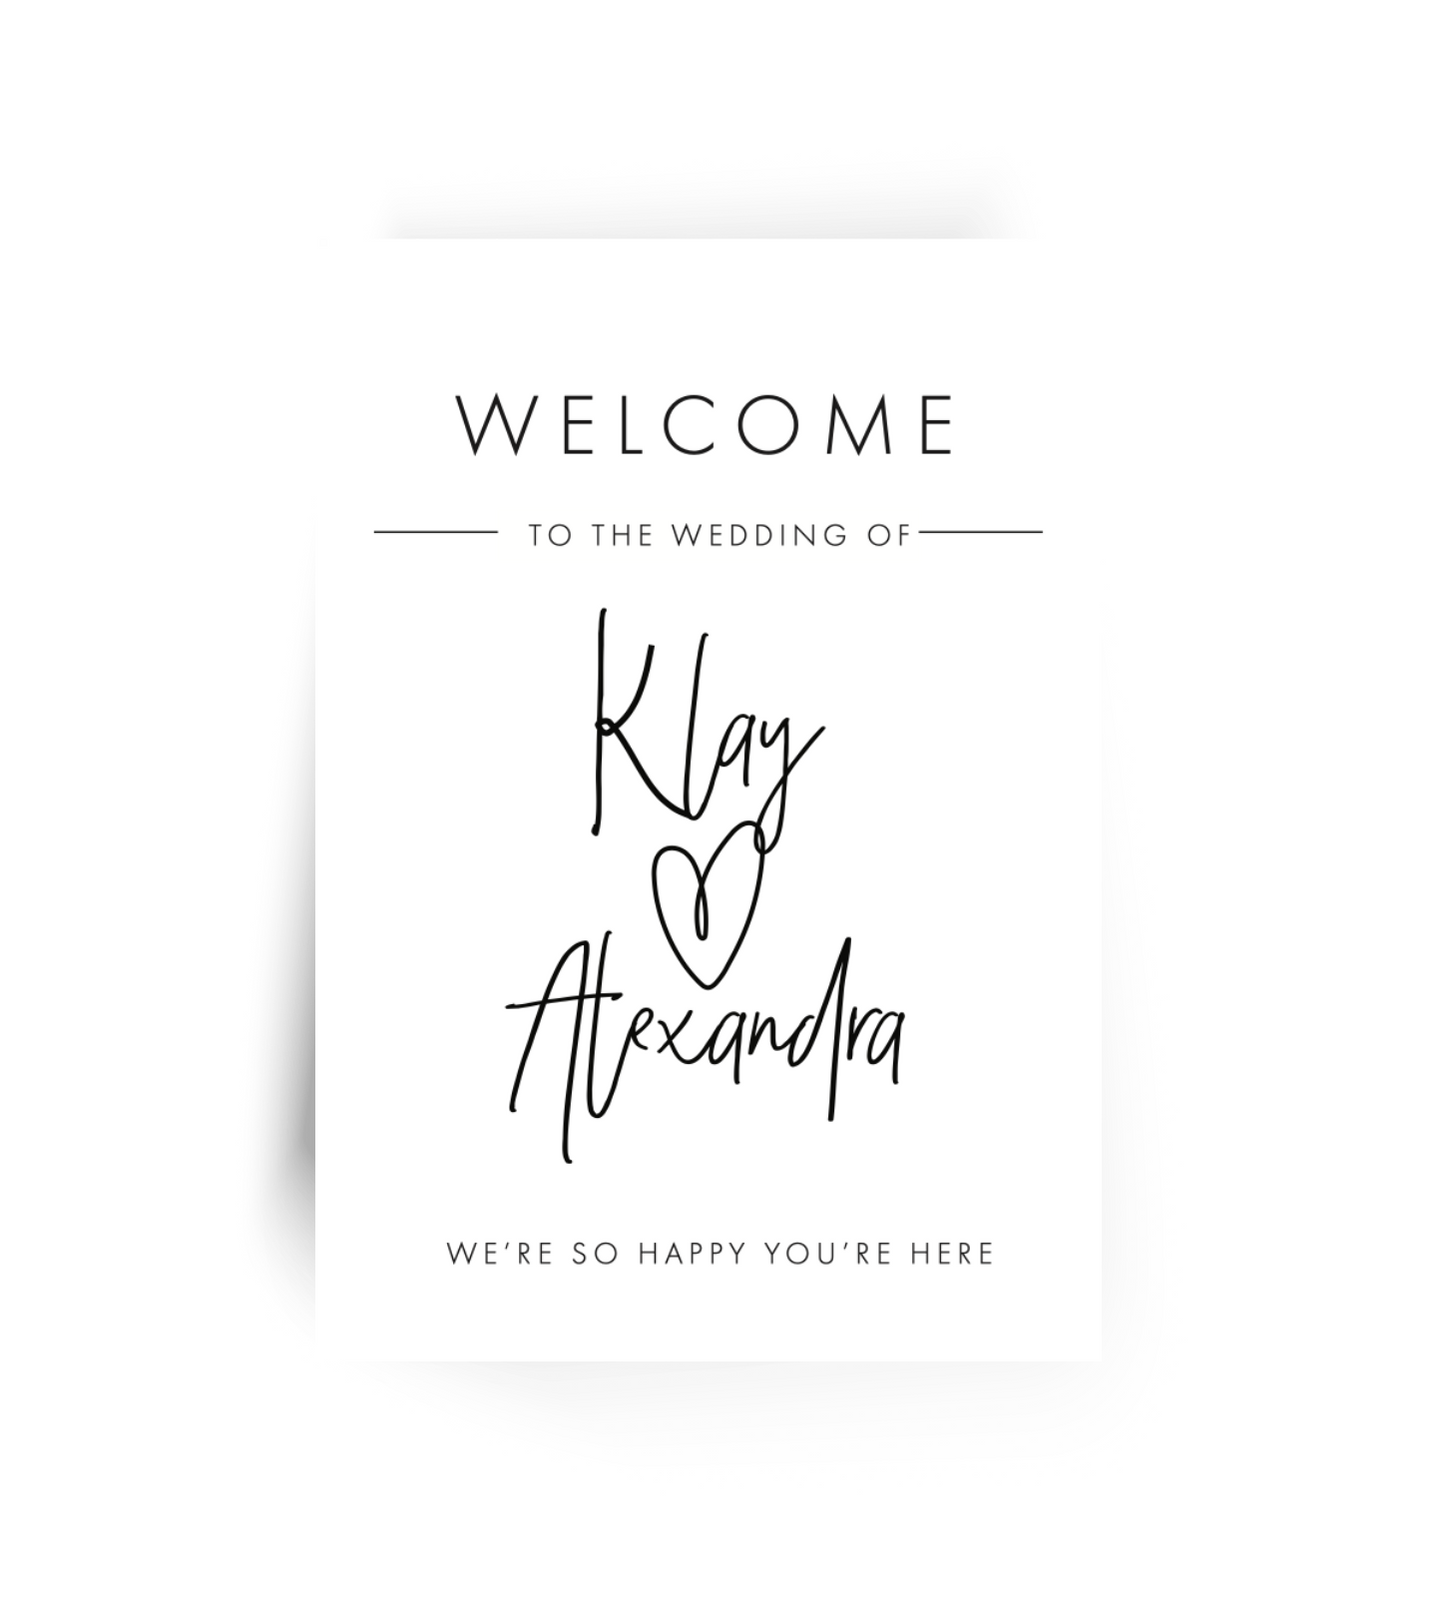 'Klay' Welcome Board